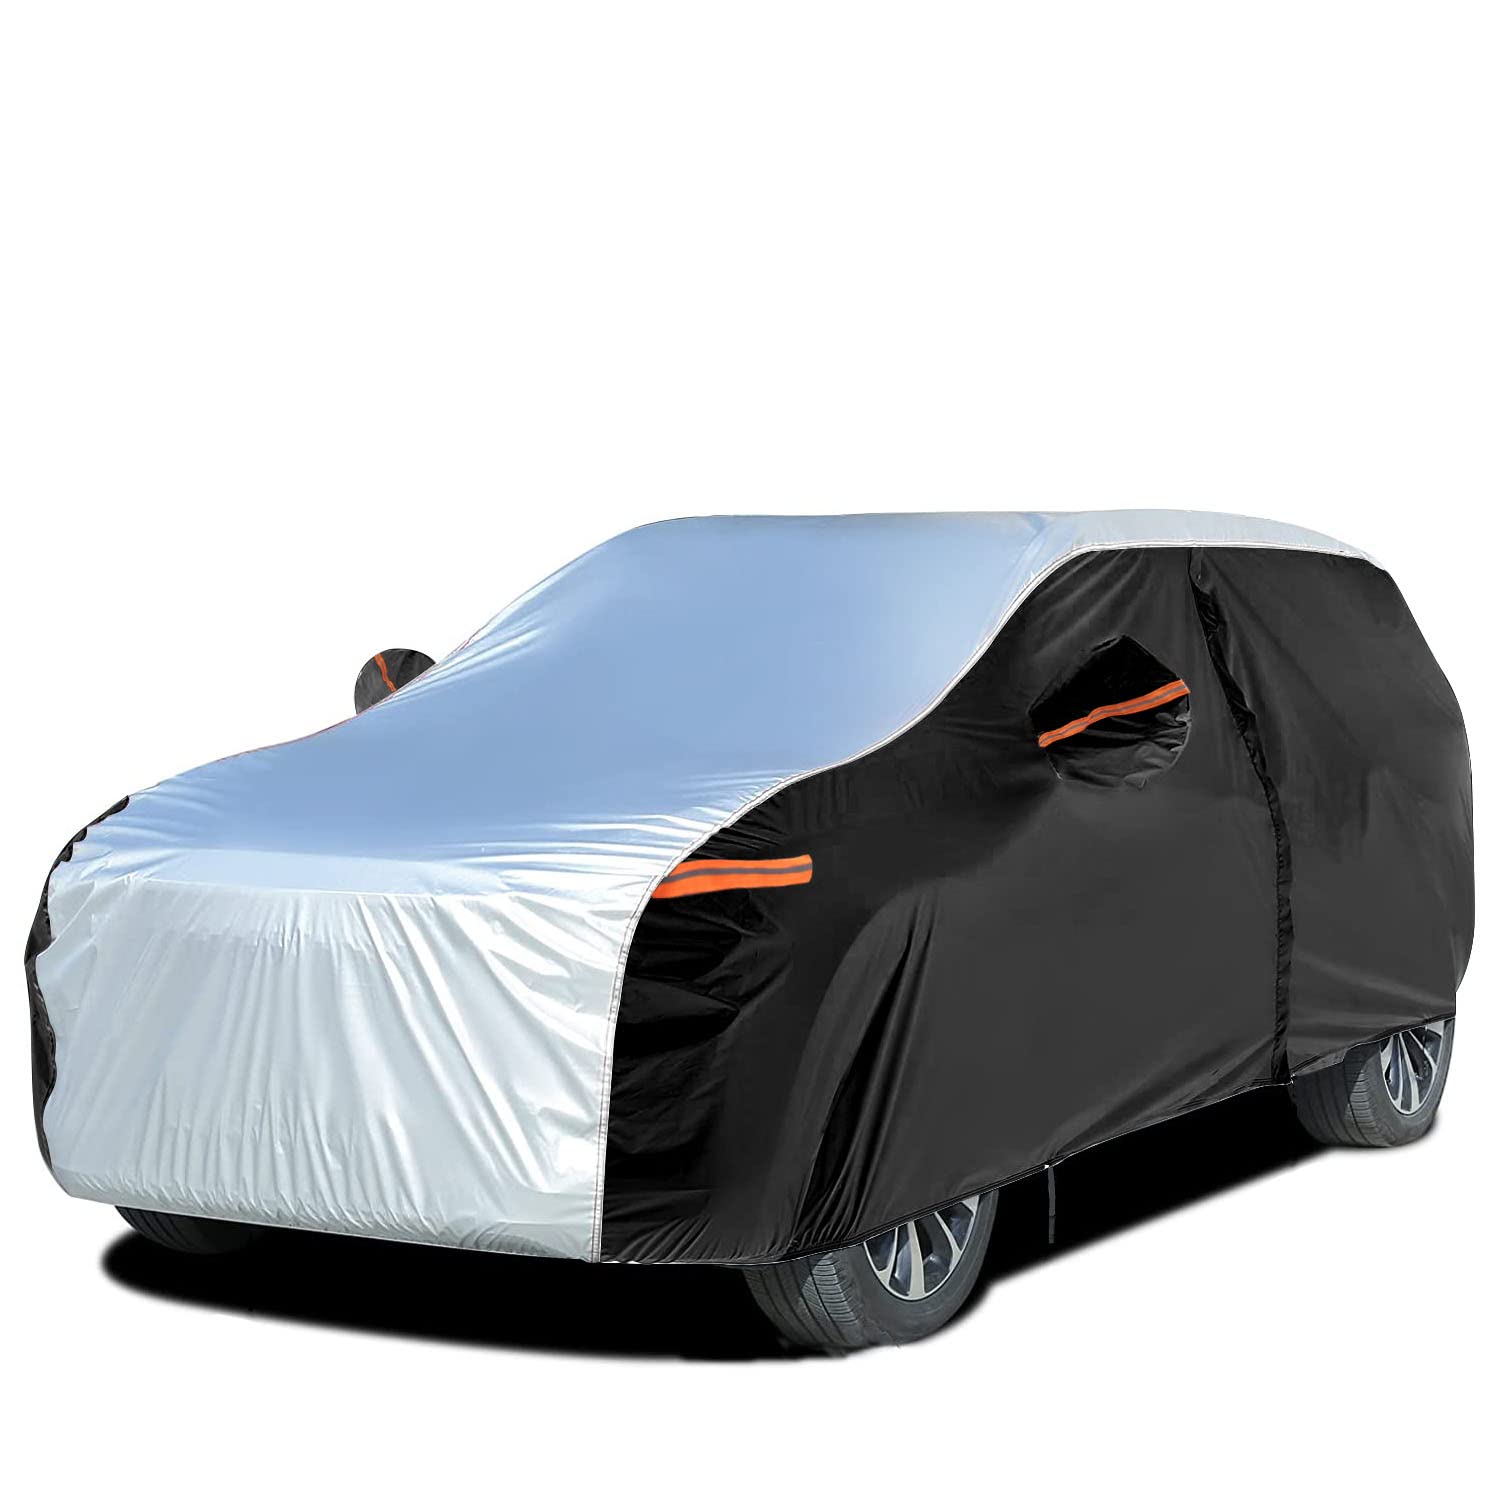 XicBoom SUV car cover 6 Layers, Waterproof All Weather car cover with Zipper Door, IndoorOutdoor Full cover, Sun Rain Snow UV Pr